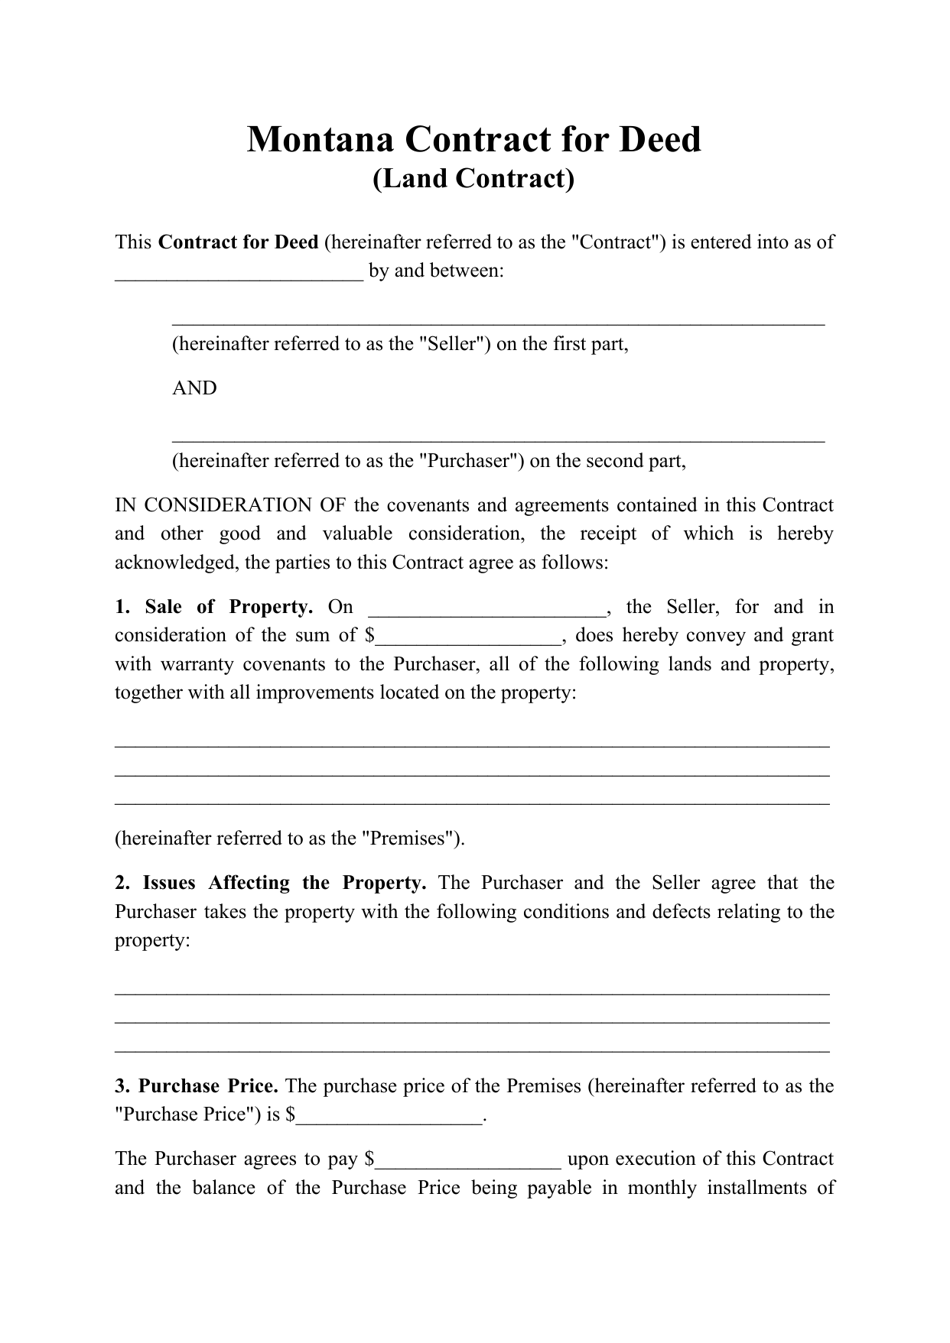 Contract for Deed (Land Contract) - Montana, Page 1